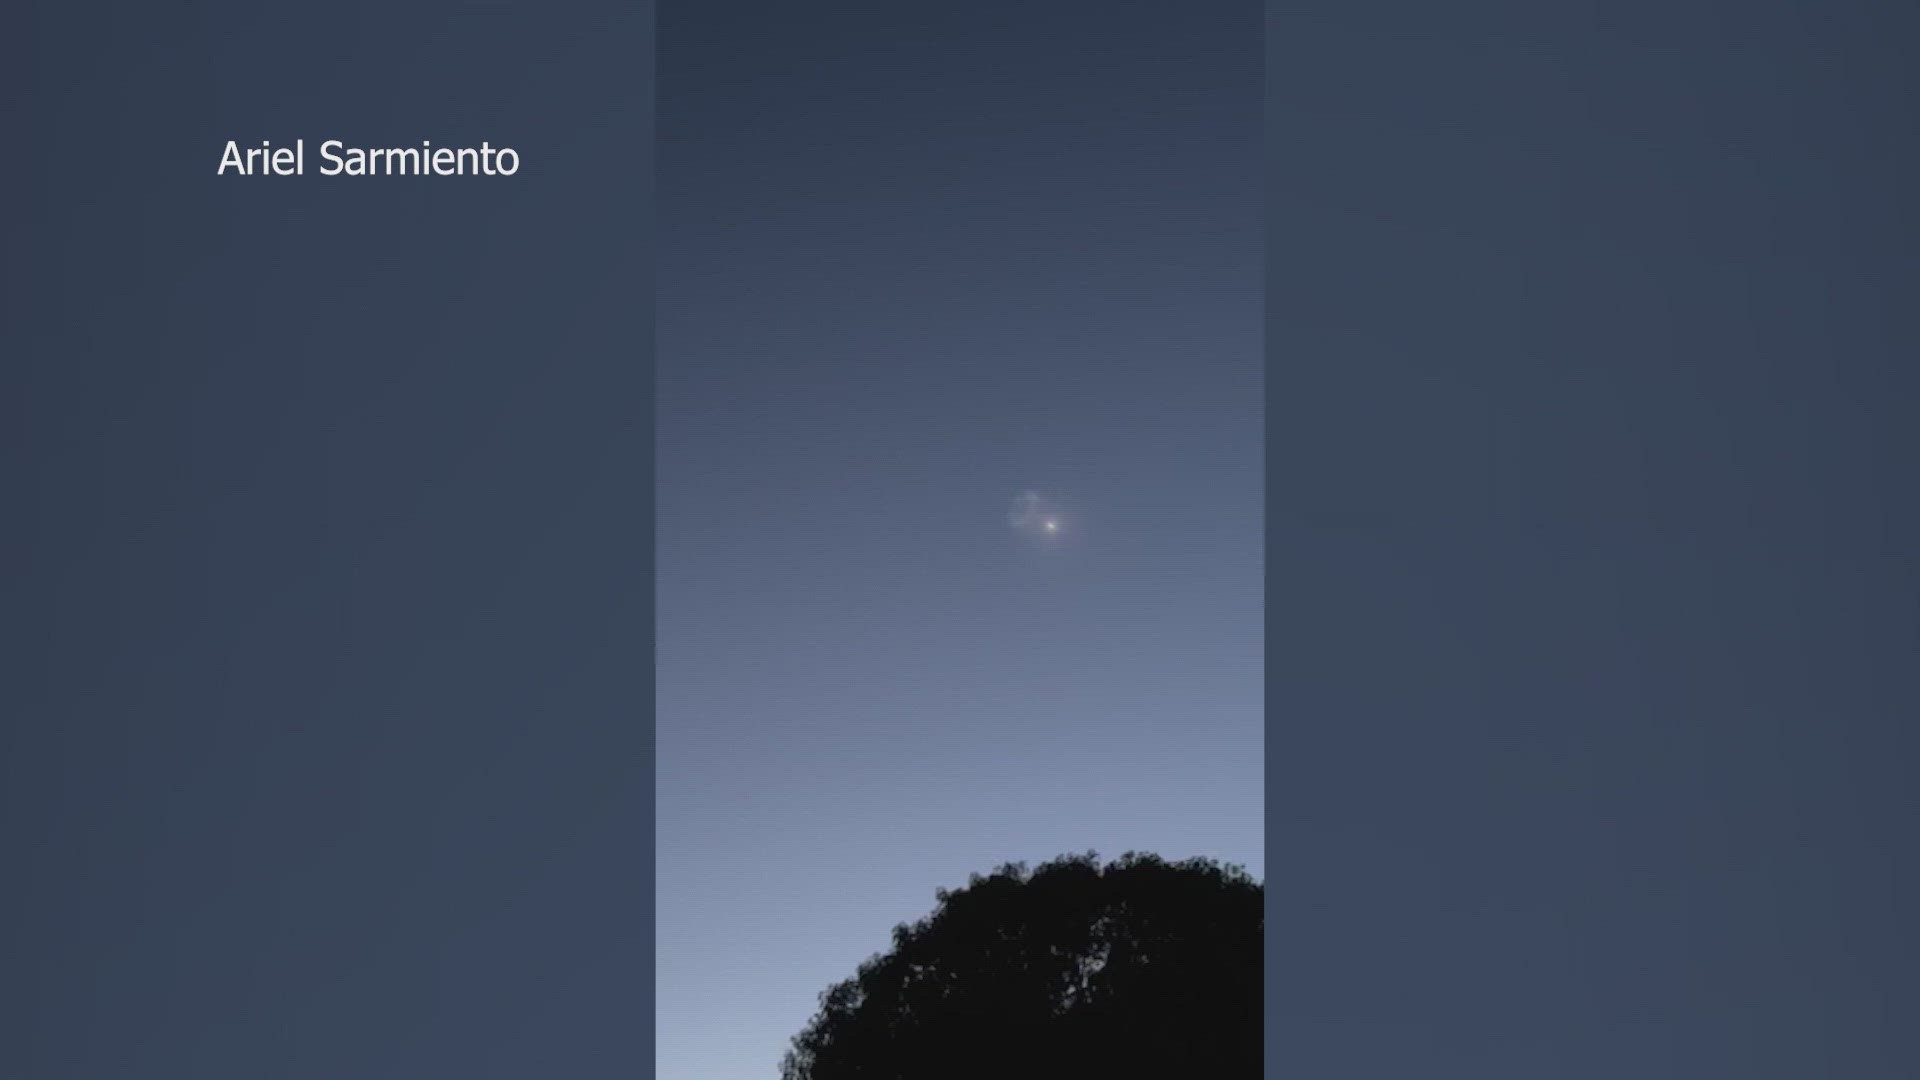 San Antonio residents reported mysterious lights seen in the sky Monday night.